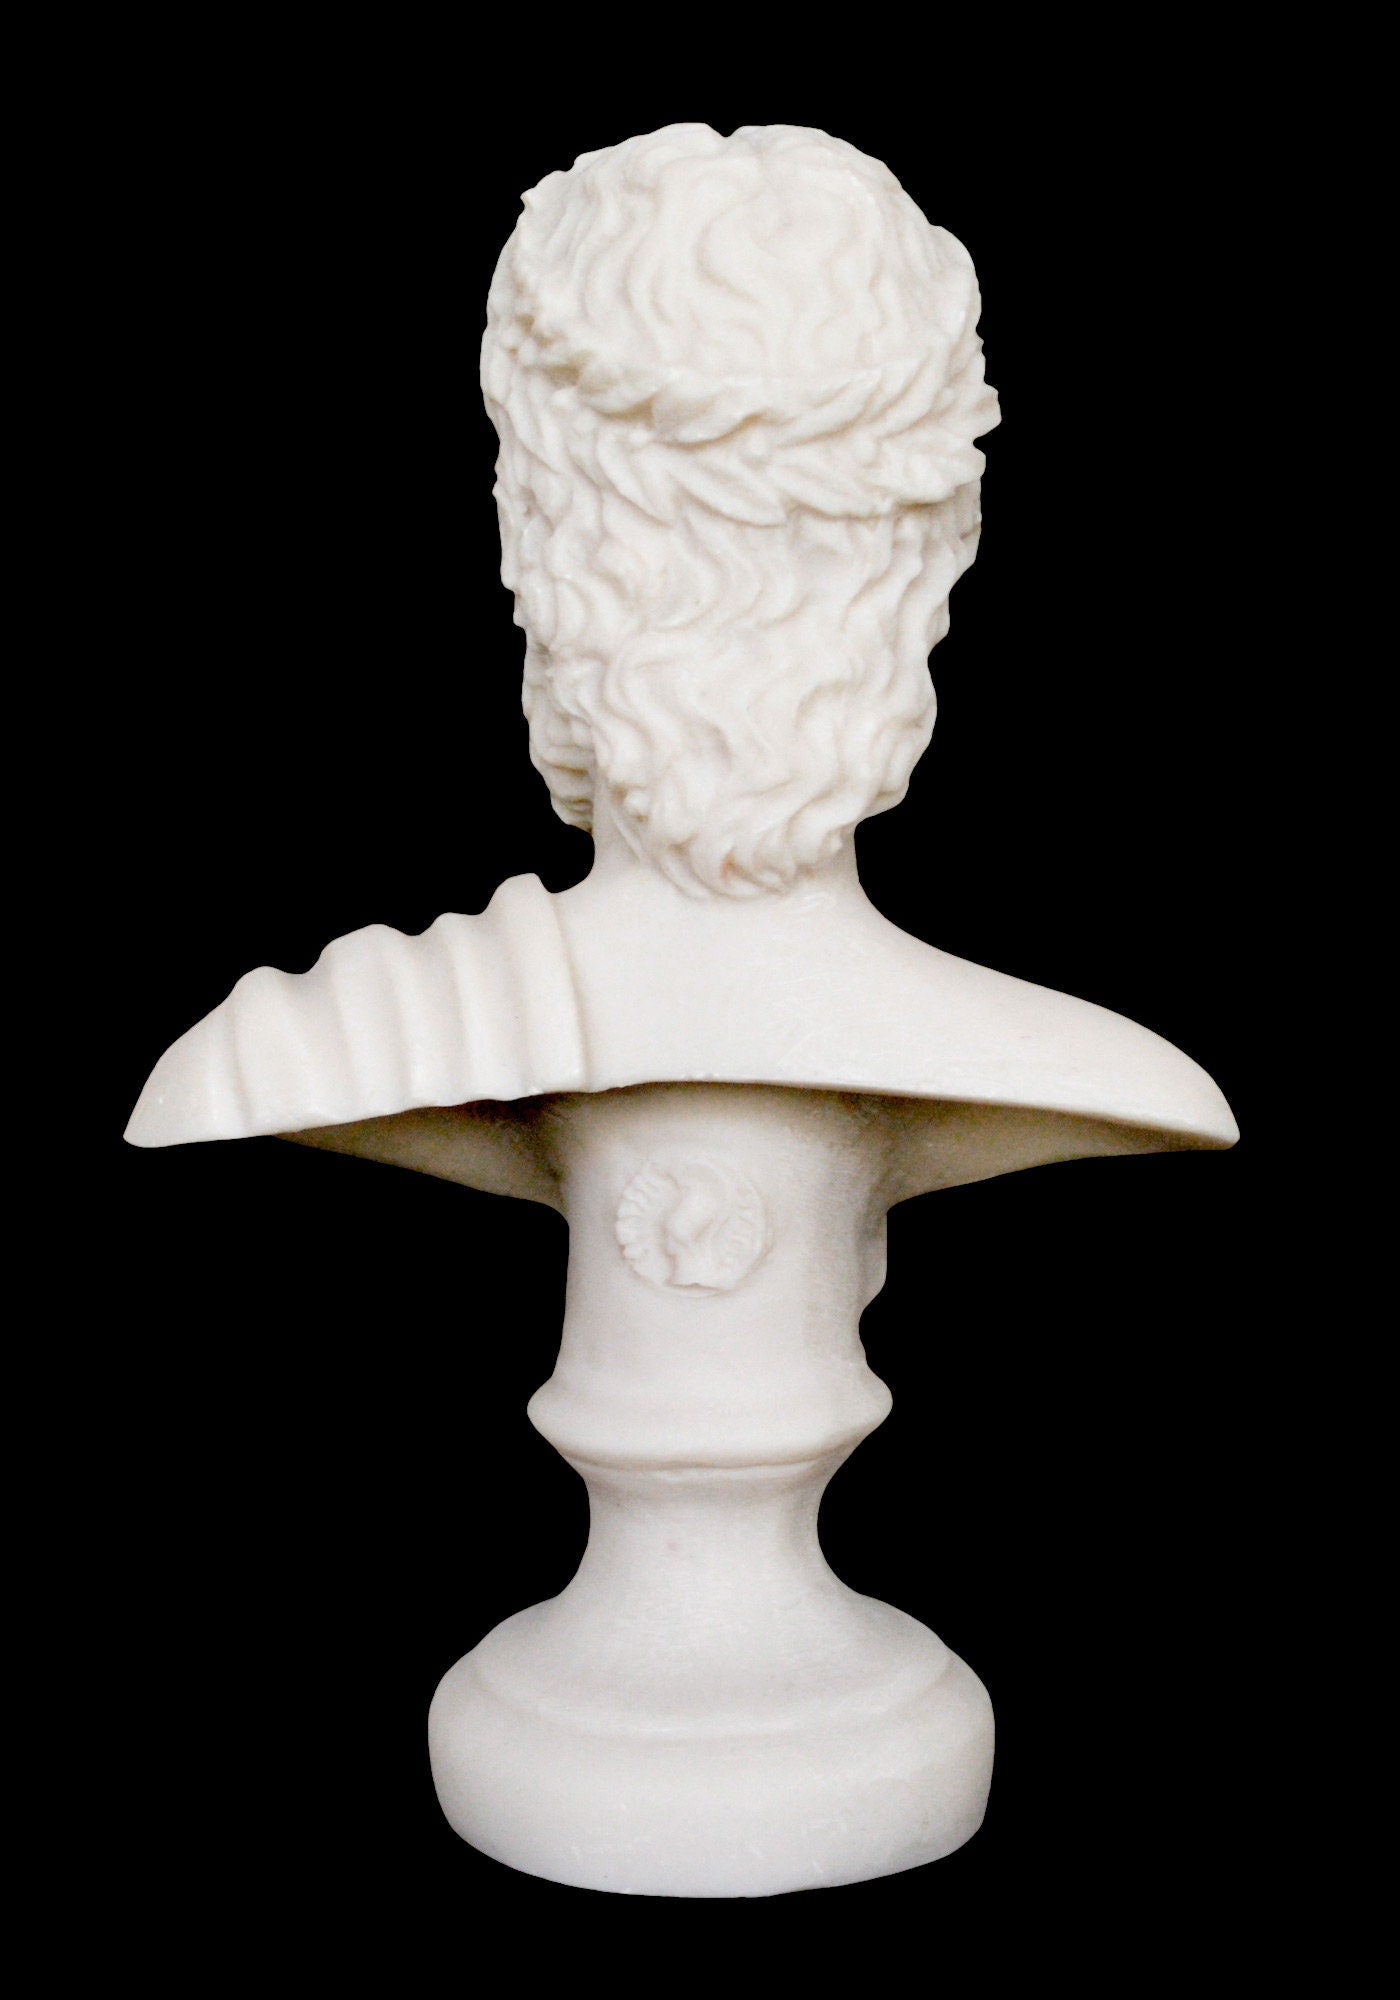 Zeus Jupiter Bust - Greek Roman God of the Sky, Law and Order, Destiny and Fate - King of the Gods of Mount Olympus - Alabaster Statue